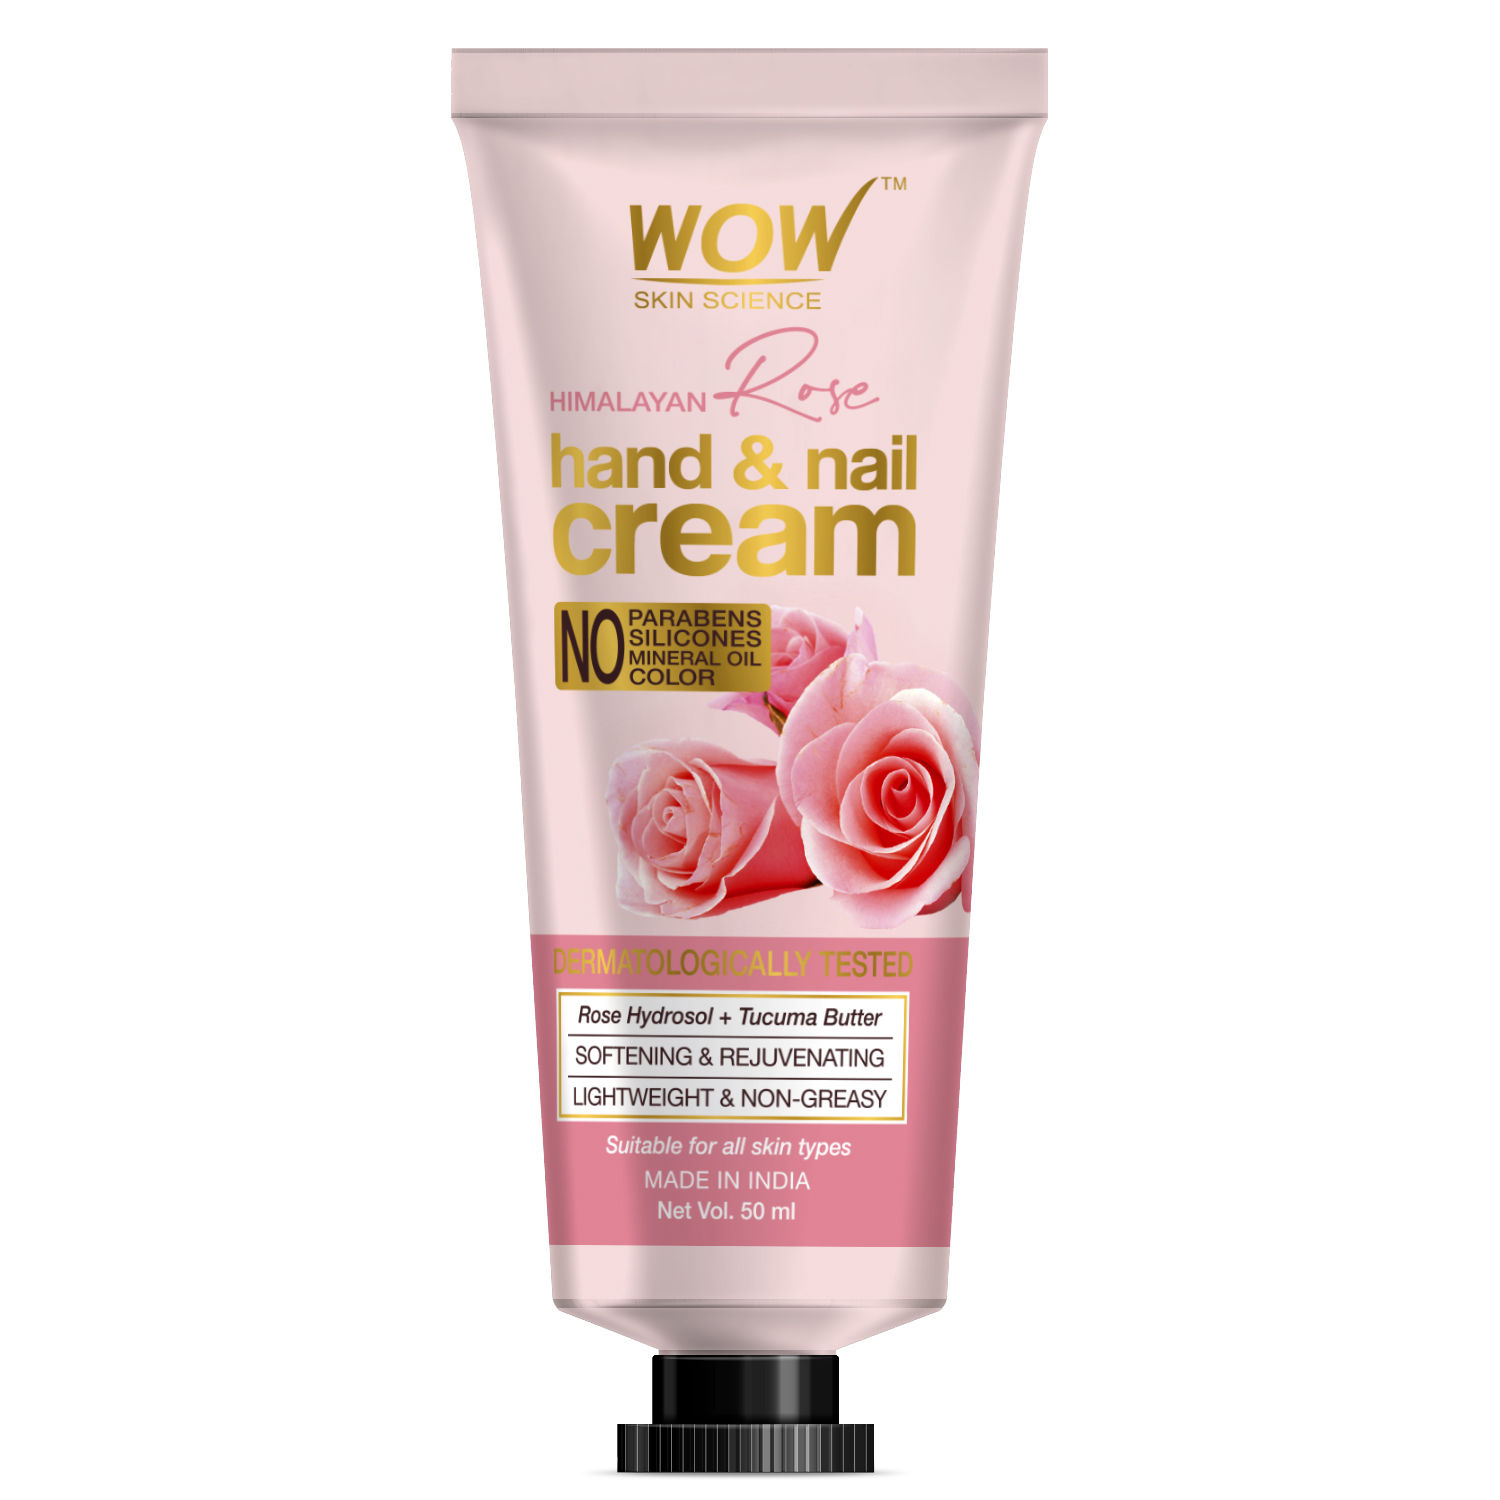 Buy WOW Skin Science Himalayan Rose Hand & Nail Cream - Softening & Rejuvenating - Lightweight & Non-Greasy - Quick Absorb - for All Skin Types - No Parabens, Silicones, Mineral Oil & Color - 50mL - Purplle